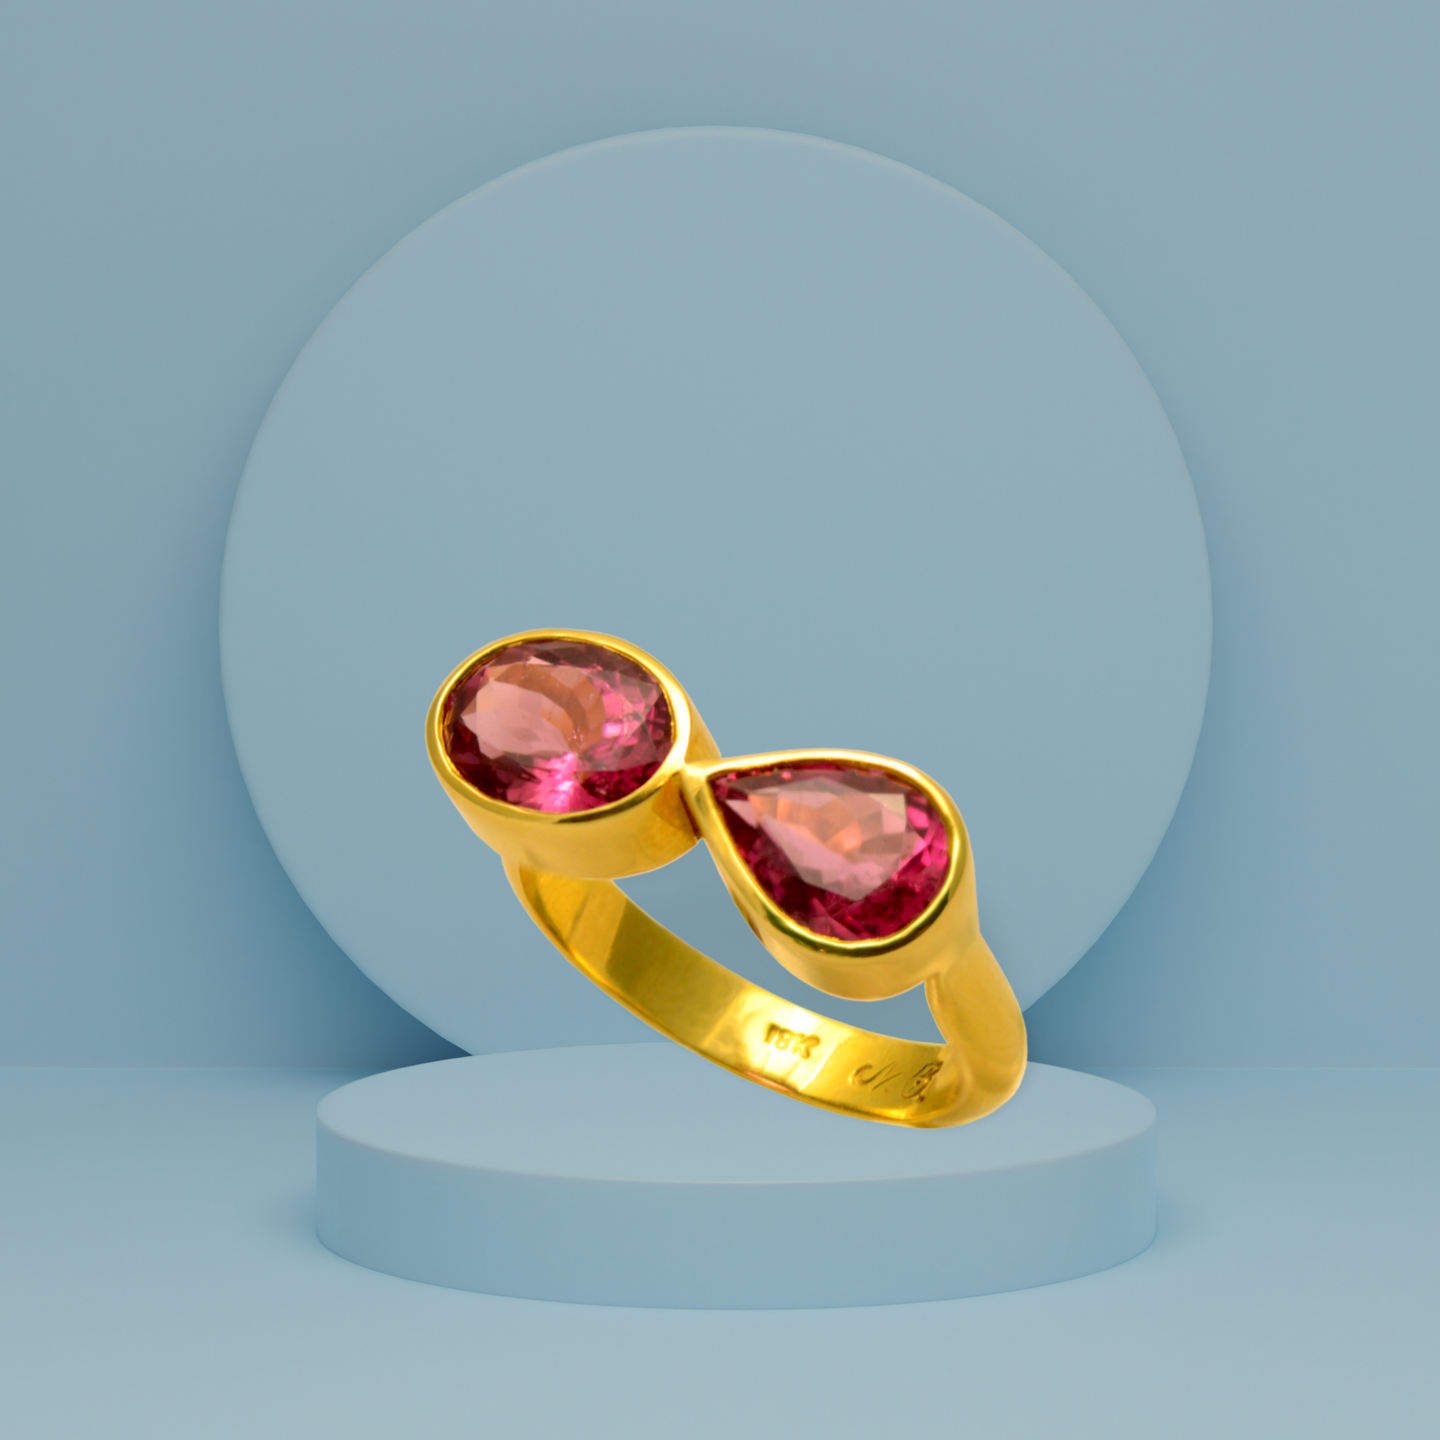 Ring in 18k Gold with Pink Tourmalines stones 3.55 c. (B-68)